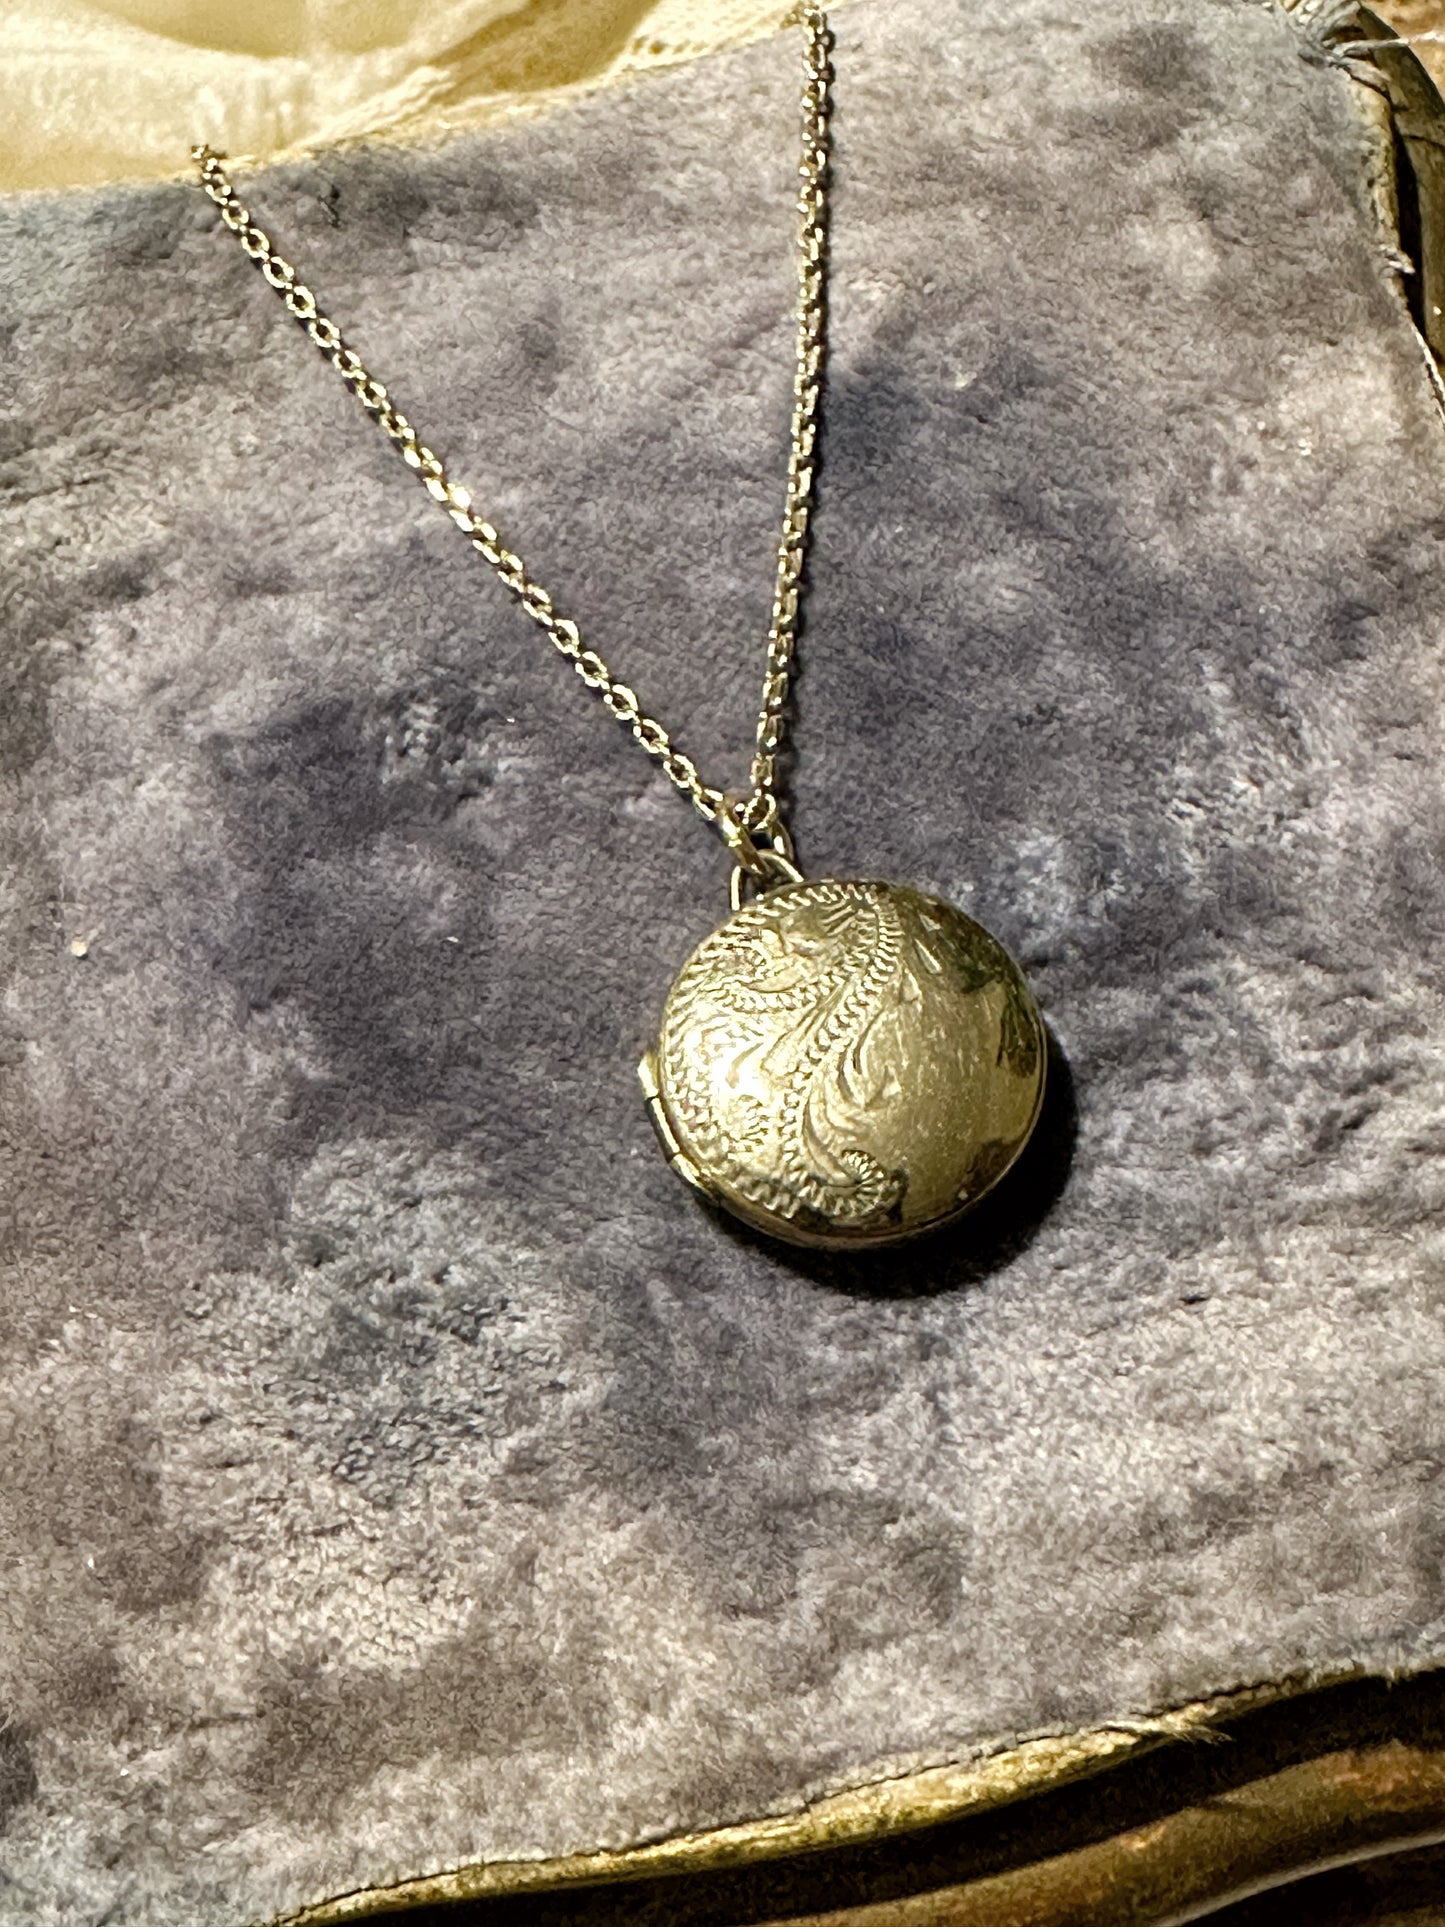 A beautiful vintage gold plated engraved locket and chain